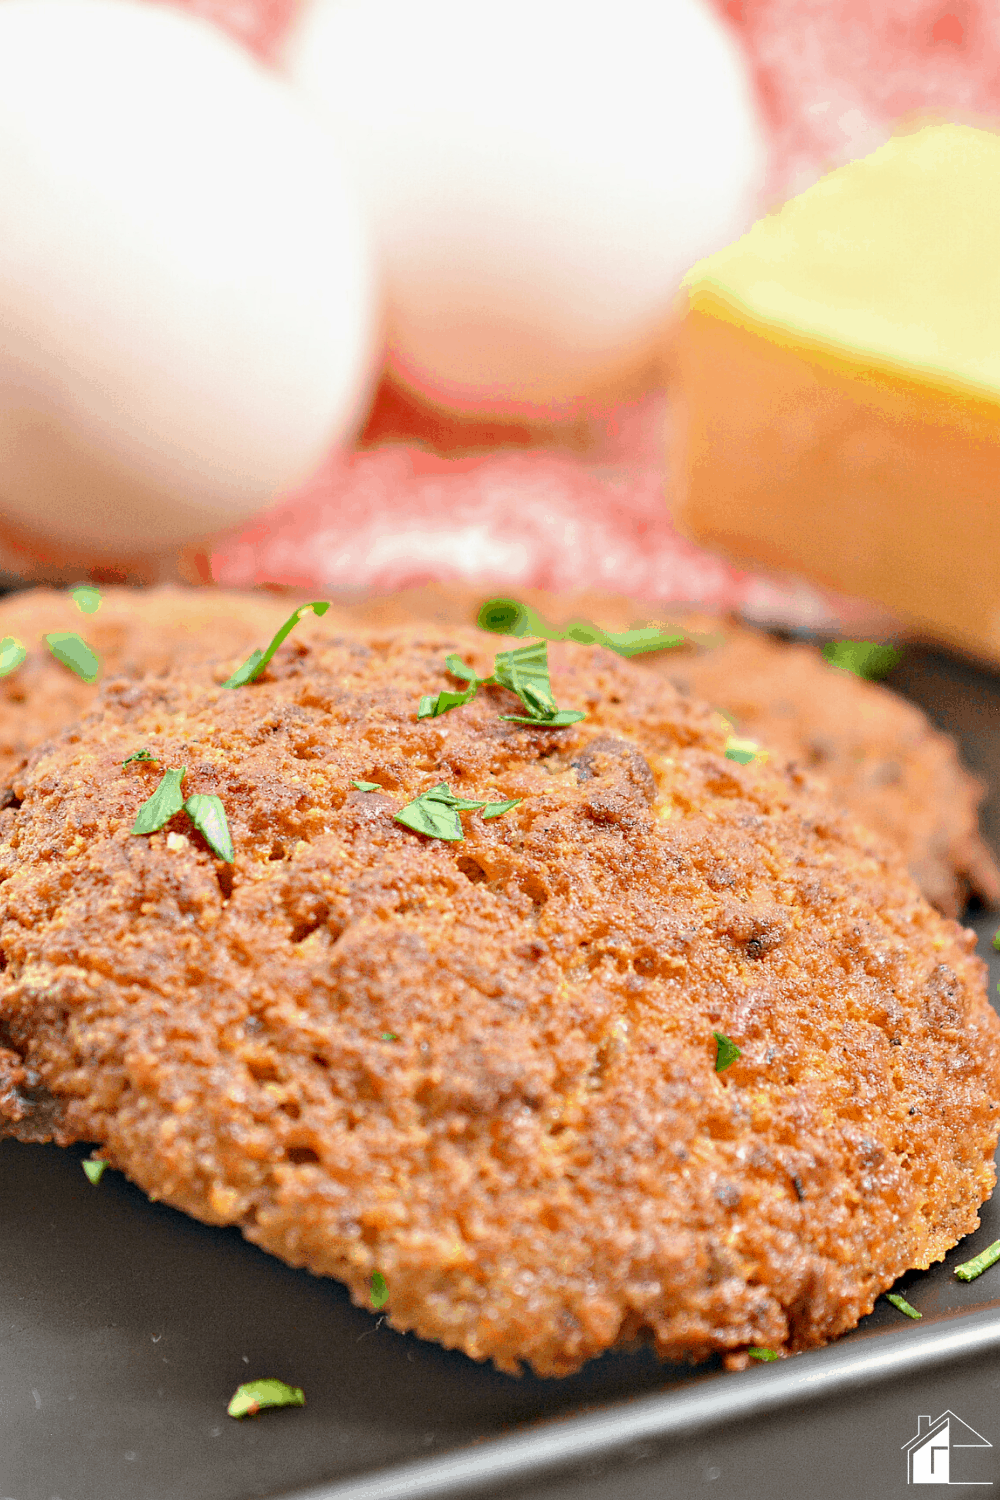 You can indulge yourself with these very low-carb Keto Savory Sausage Breakfast Cookies without the guilty feeling of eating more carbs than what you need. via @mystayathome